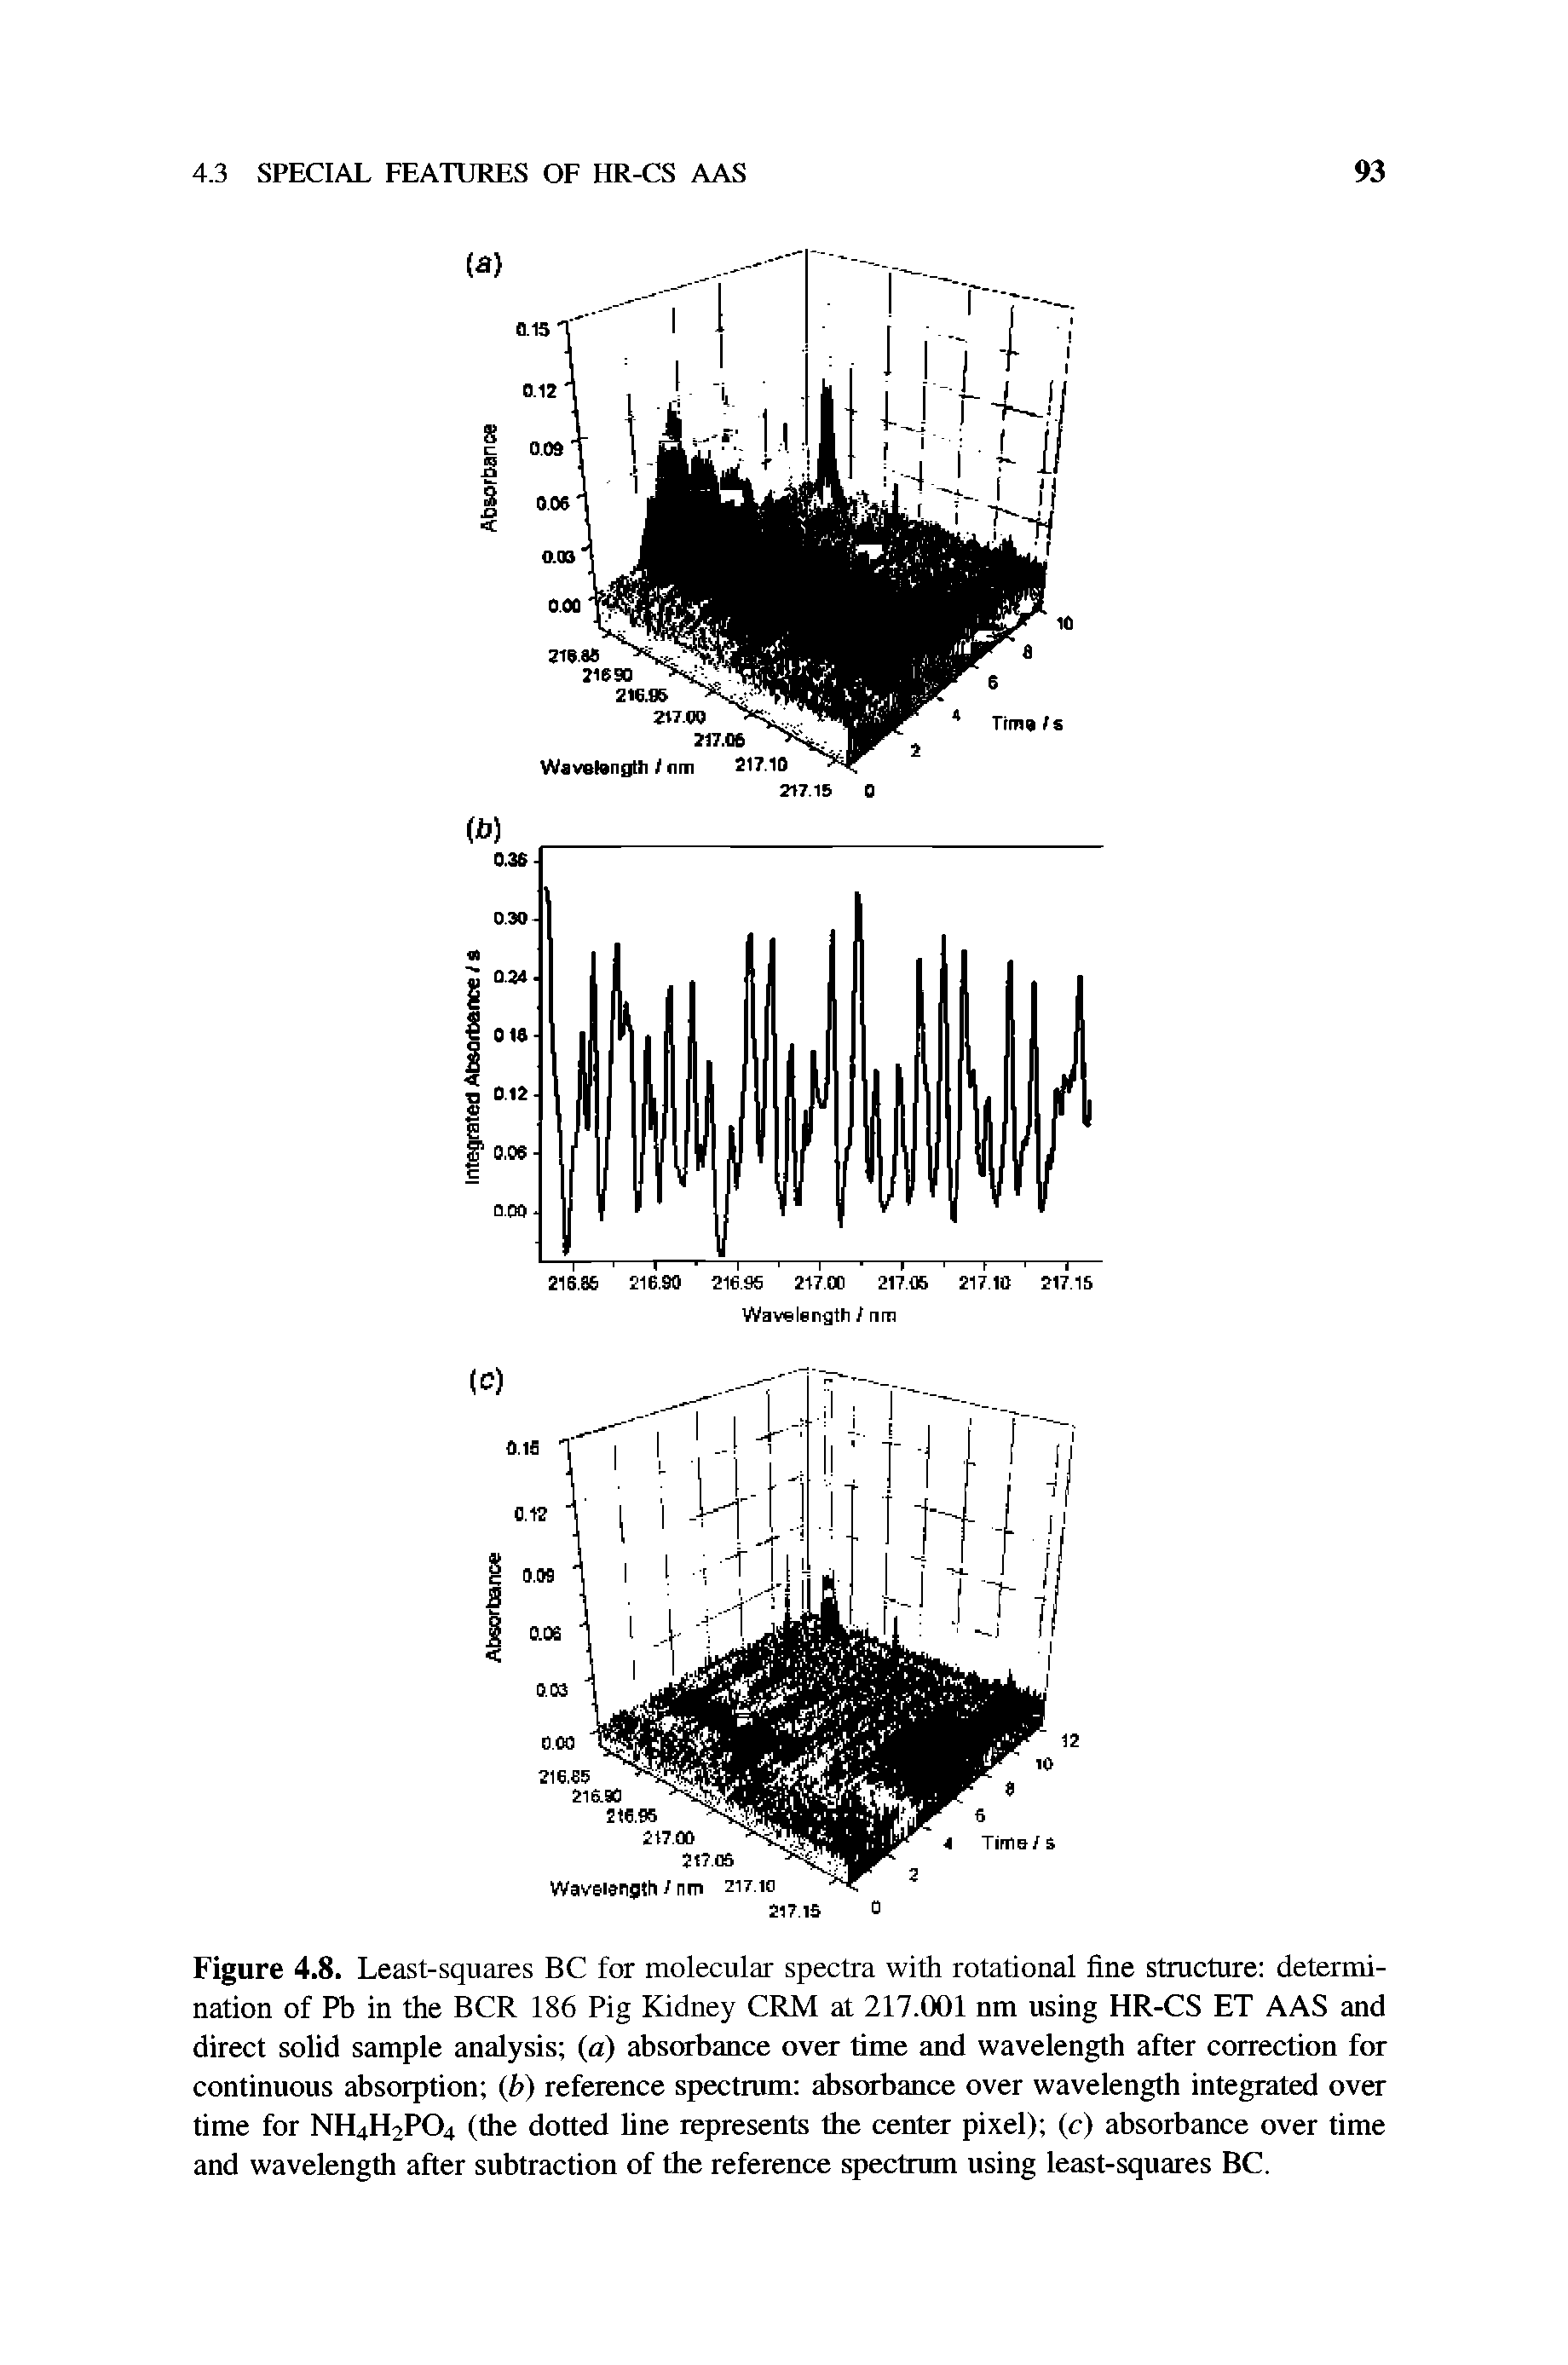 Figure 4.8. Least-squares BC for molecular spectra with rotational fine structure determination of Pb in the BCR 186 Pig Kidney CRM at 217.001 nm using HR-CS ET AAS and direct solid sample analysis (a) absorbance over time and wavelength after correction for continuous absorption (b) reference spectrum absorbance over wavelength integrated over time for NH4H2P04 (the dotted line represents the center pixel) (c) absorbance over time and wavelength after subtraction of the reference spectrum using least-squares BC.